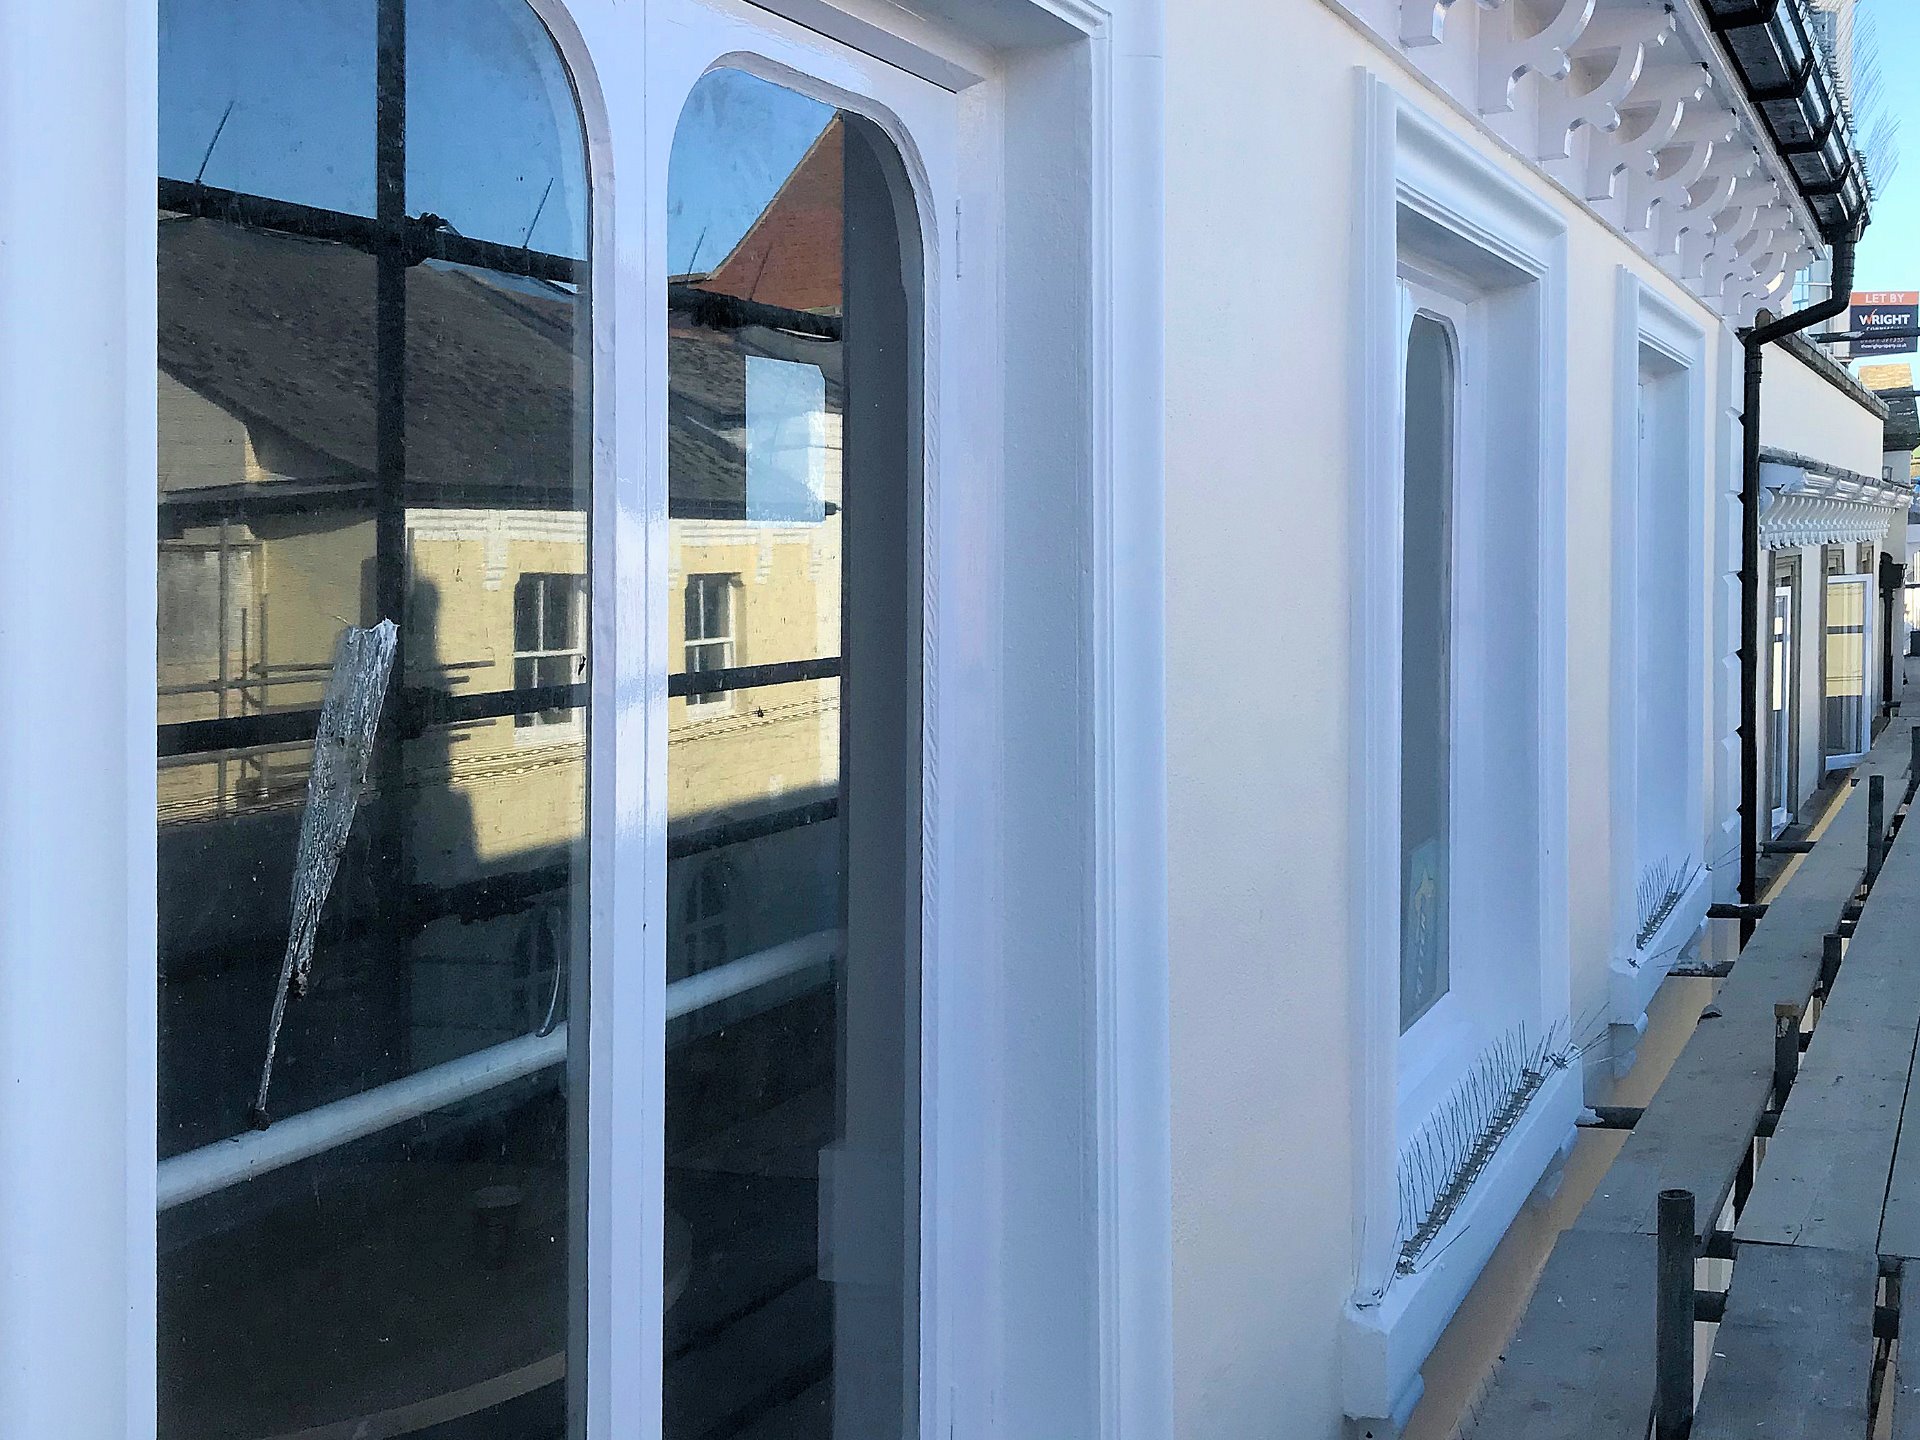 Window frames refurbished and painted